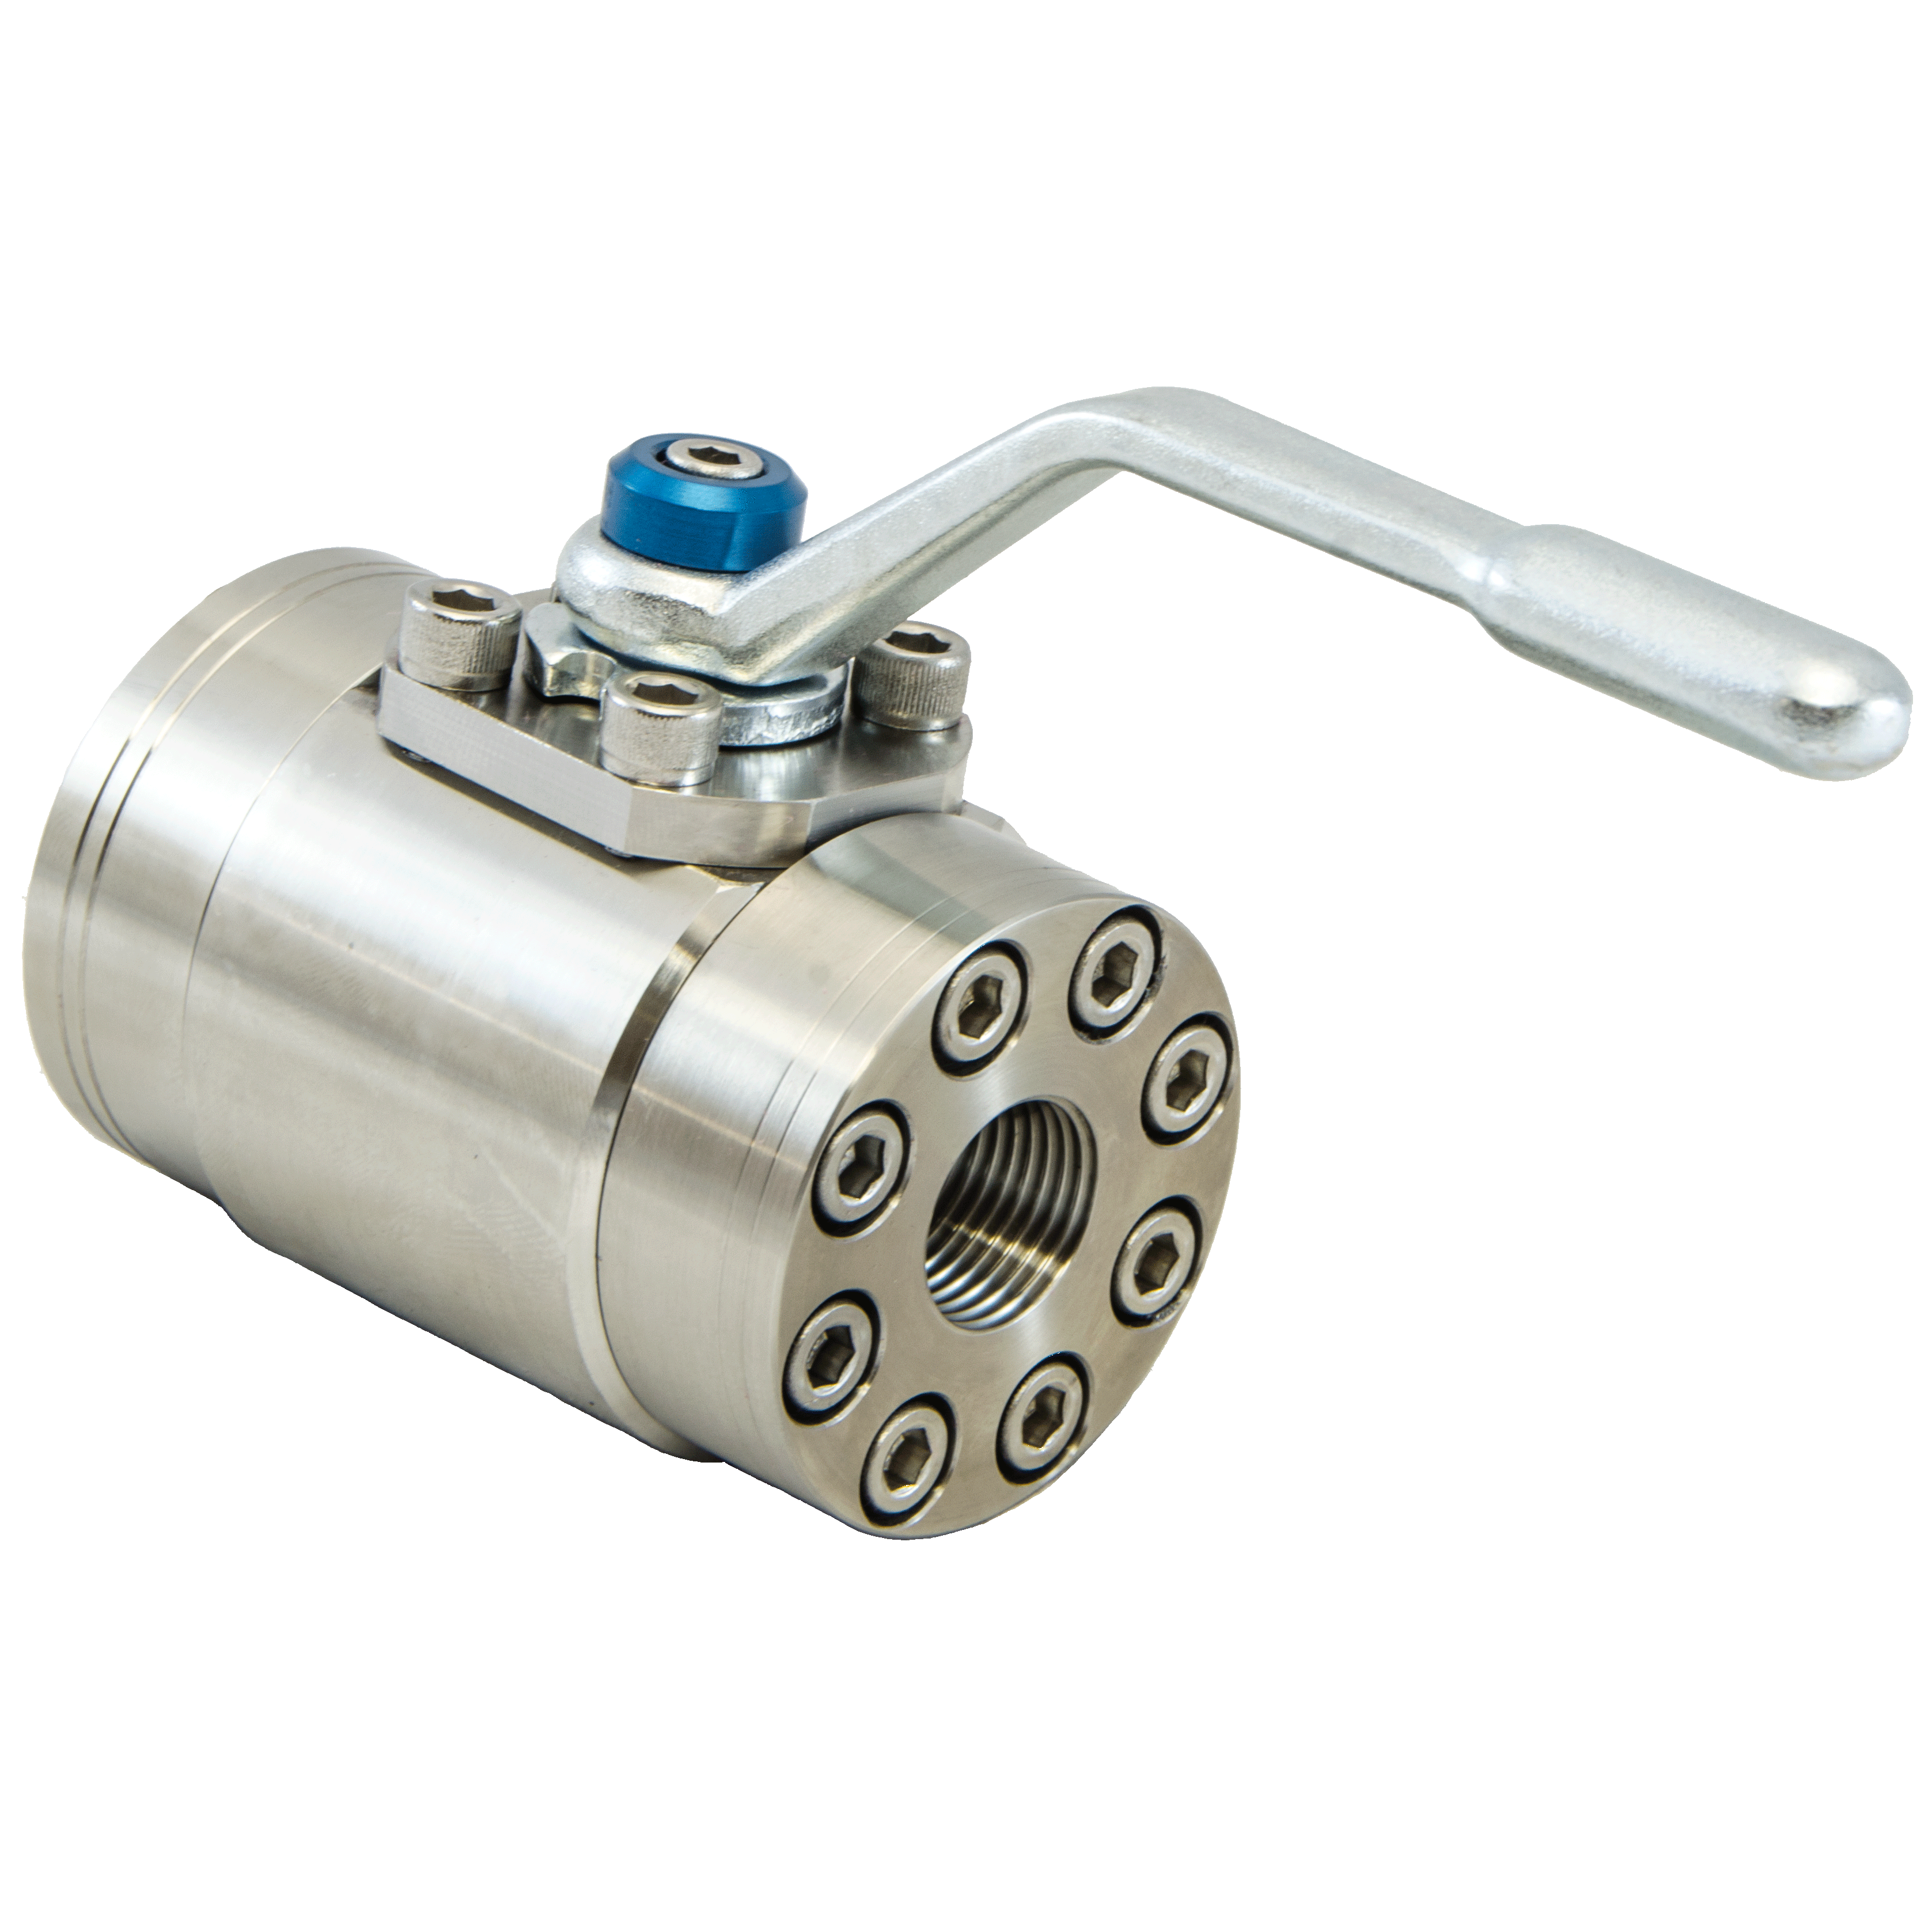 BVQG-1000S-2211 : DMIC Stainless Gas Ball Valve, #16 SAE (1), 316 Stainless Steel, 6000psi, Two-Way